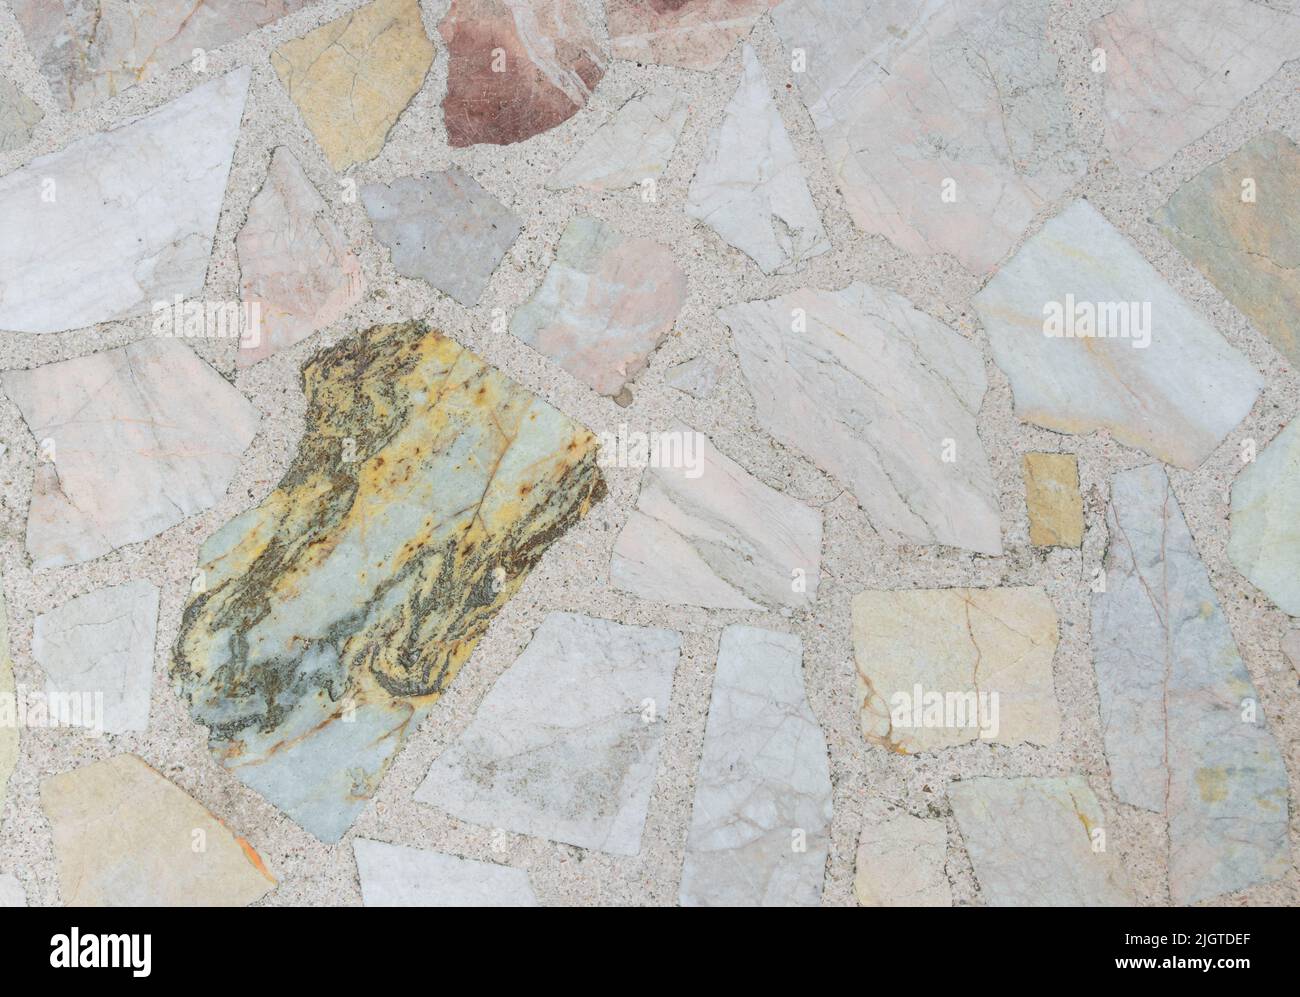 stone marble crap cover on terrazzo flooring. vintage texture old for background image horizontal Stock Photo